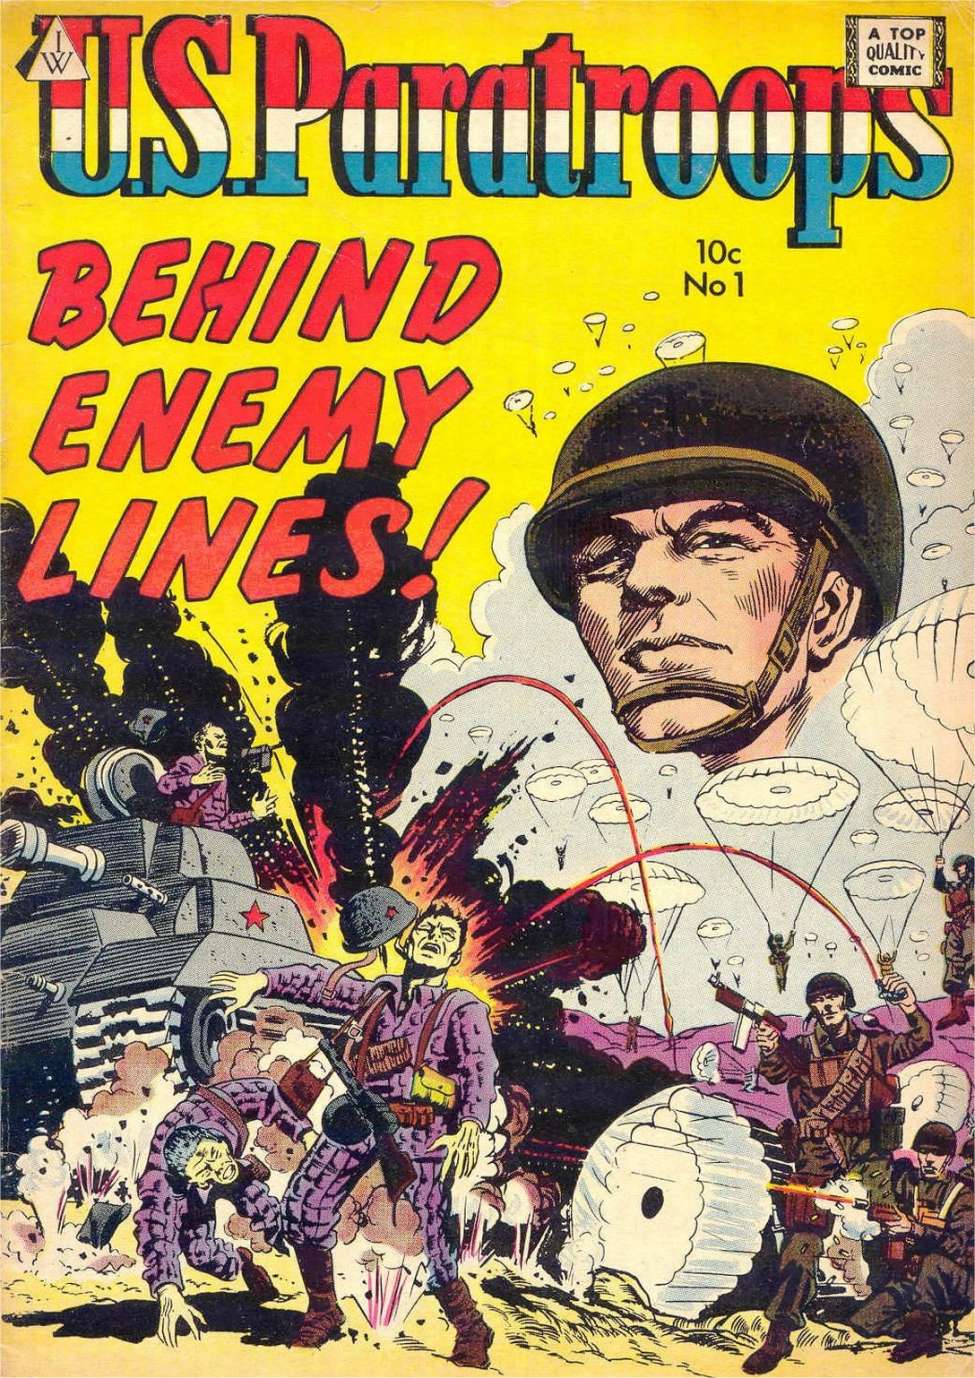 Comic Book Cover For U.S. Paratroops 1